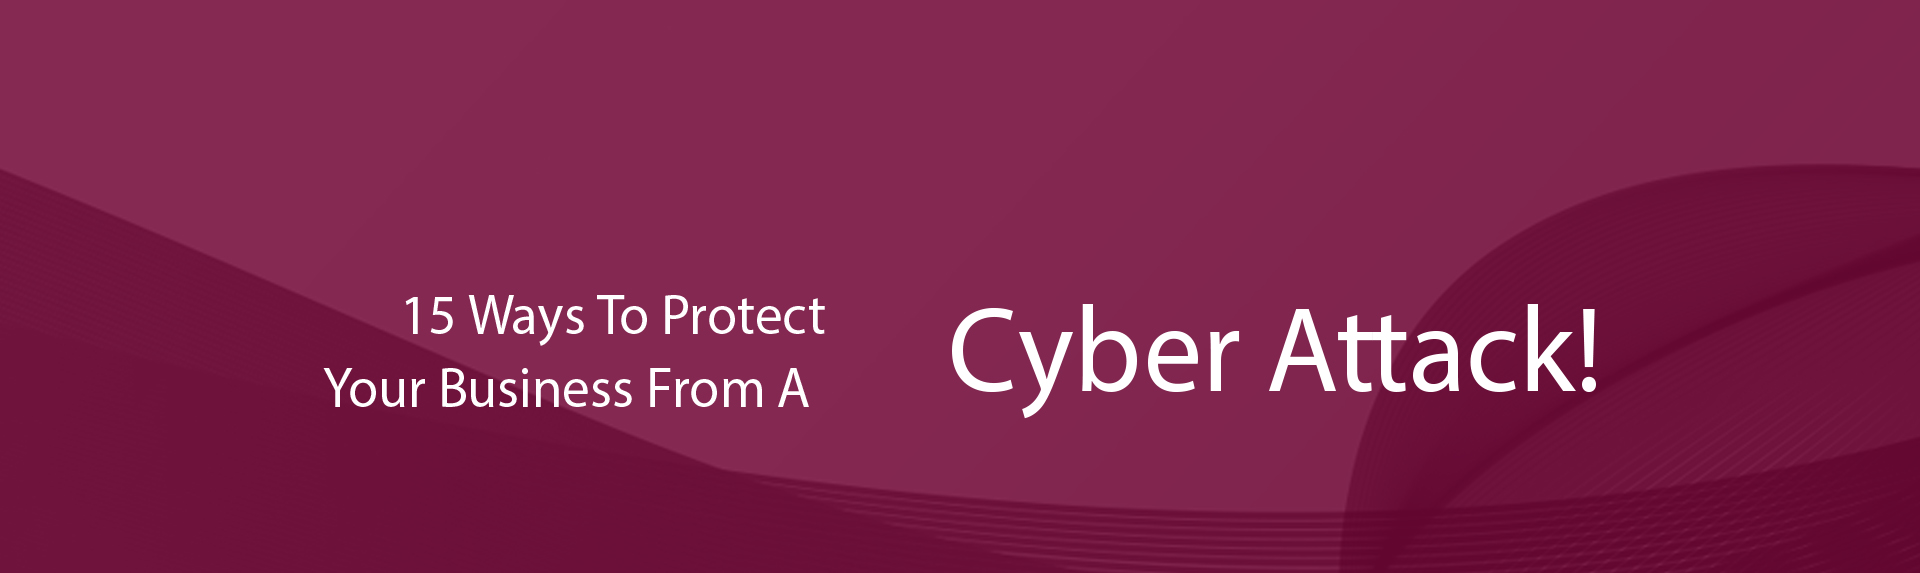 Cyber Attack! 15 ways to protect your business